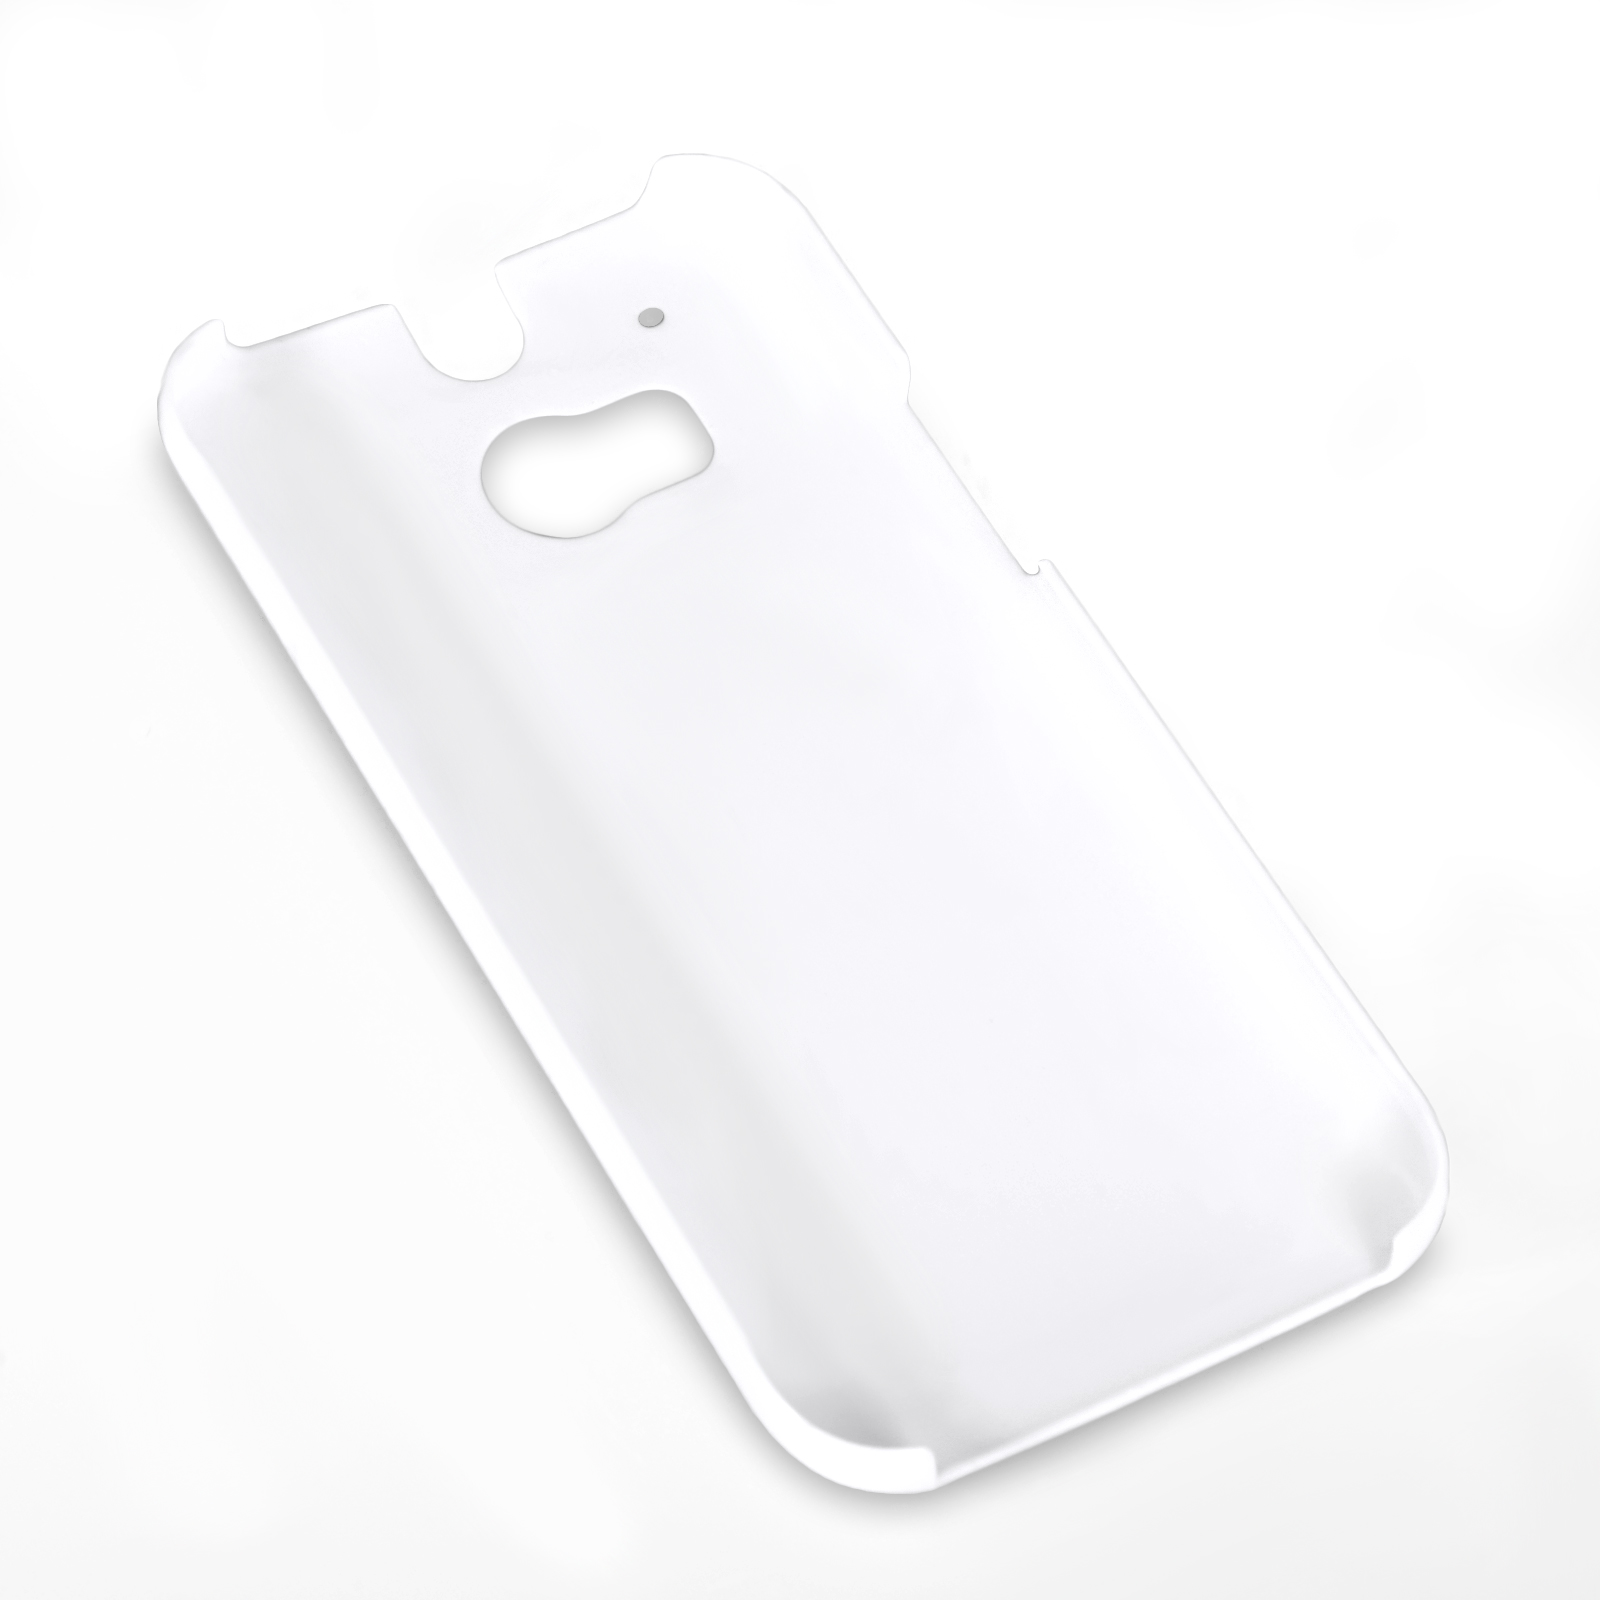 Case Mate Barely There for HTC One M8 - White